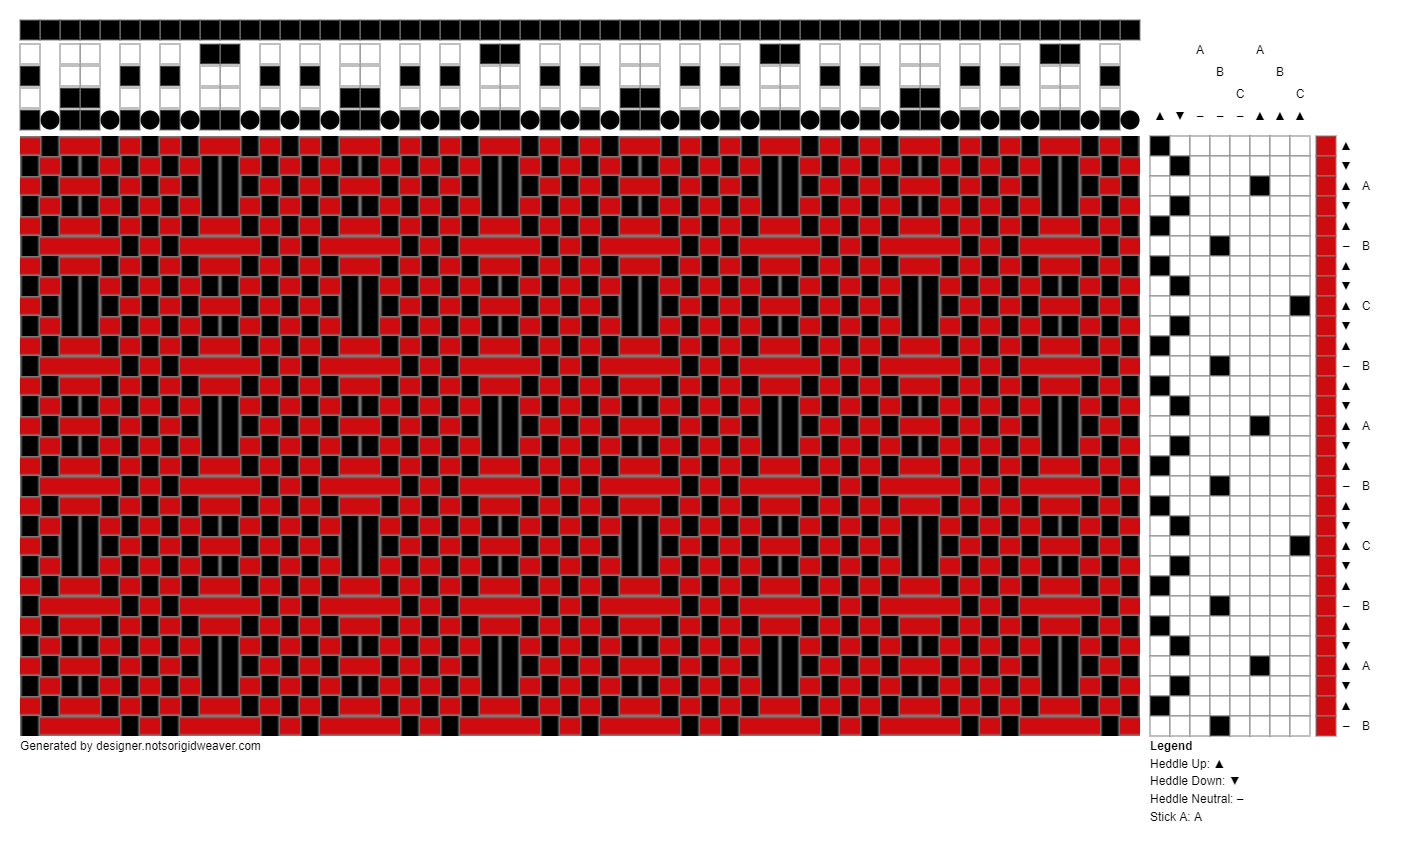 A red and black design from Not So Rigid Designer with some doubled slots